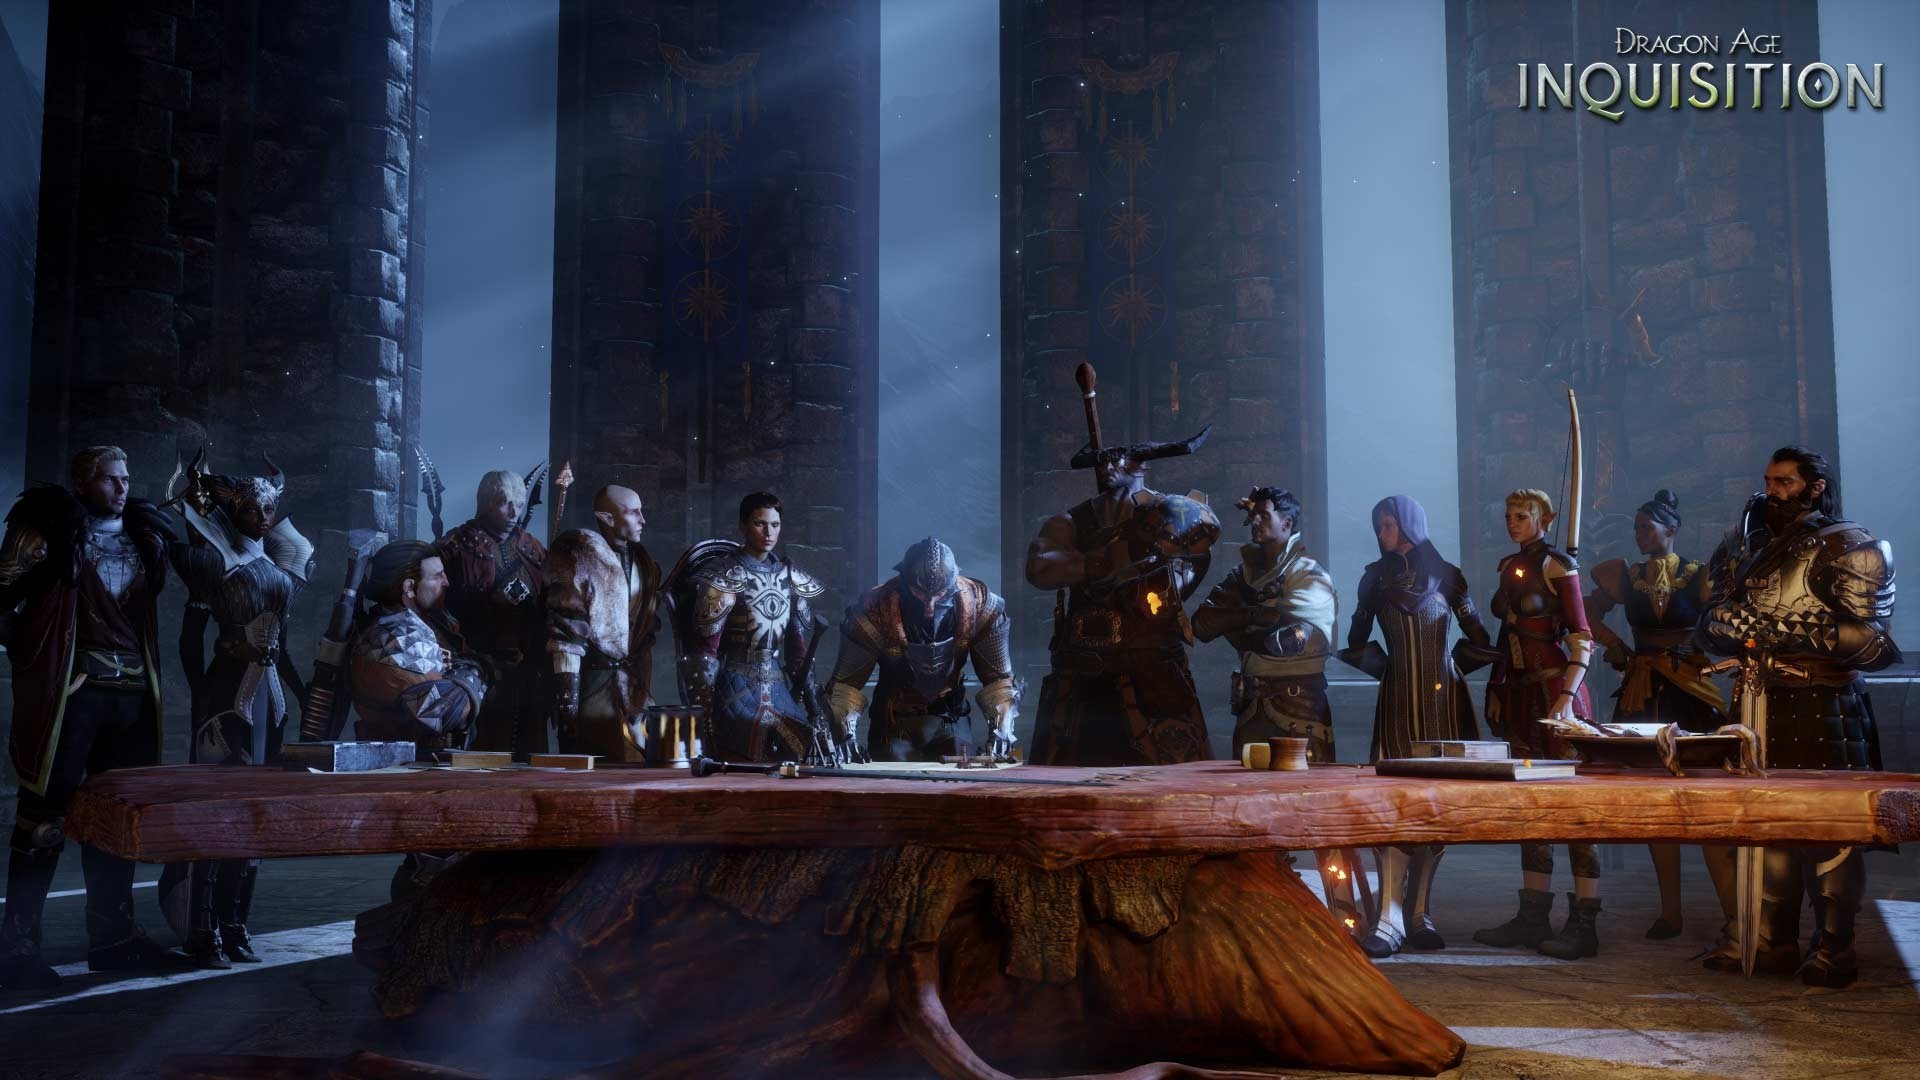 1920x1080 Wallpaper #1 Wallpaper from Dragon Age: Inquisition